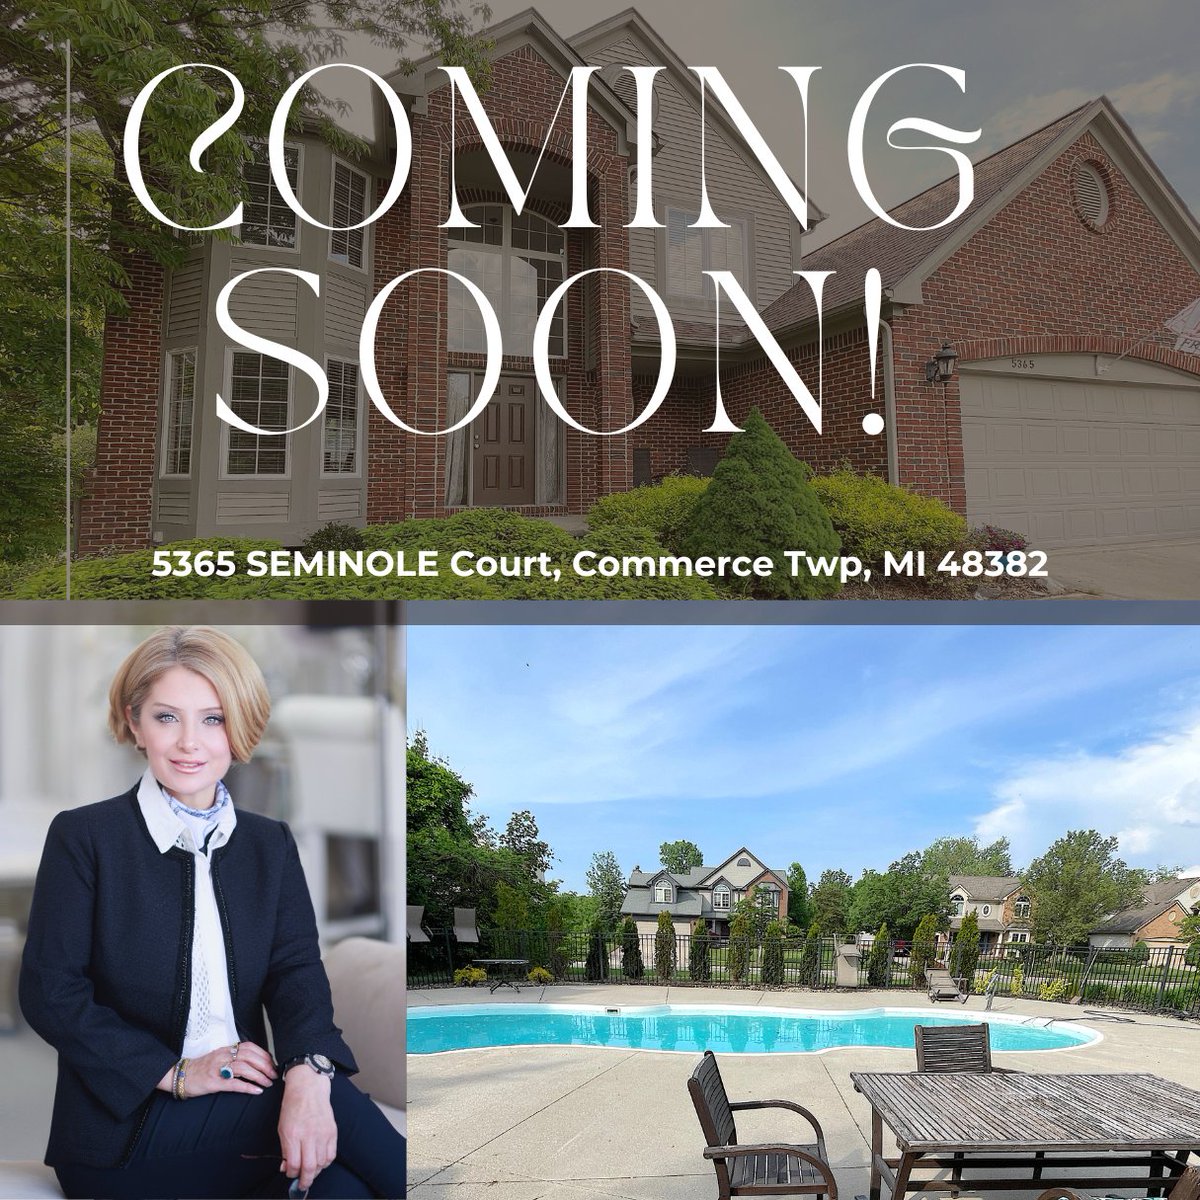 🌟 Coming Soon! 🌟 5365 SEMINOLE Court, Commerce Twp - Discover your dream home in The Ponds at Beacon Hill, a prestigious golf community! 
#DreamHome #ComingSoon #GolfCommunity #ModernLiving #LuxuryLiving #RealEstate #CommerceTwp #HomeForSale #PoolHouse #FamilyHome #ContactMe